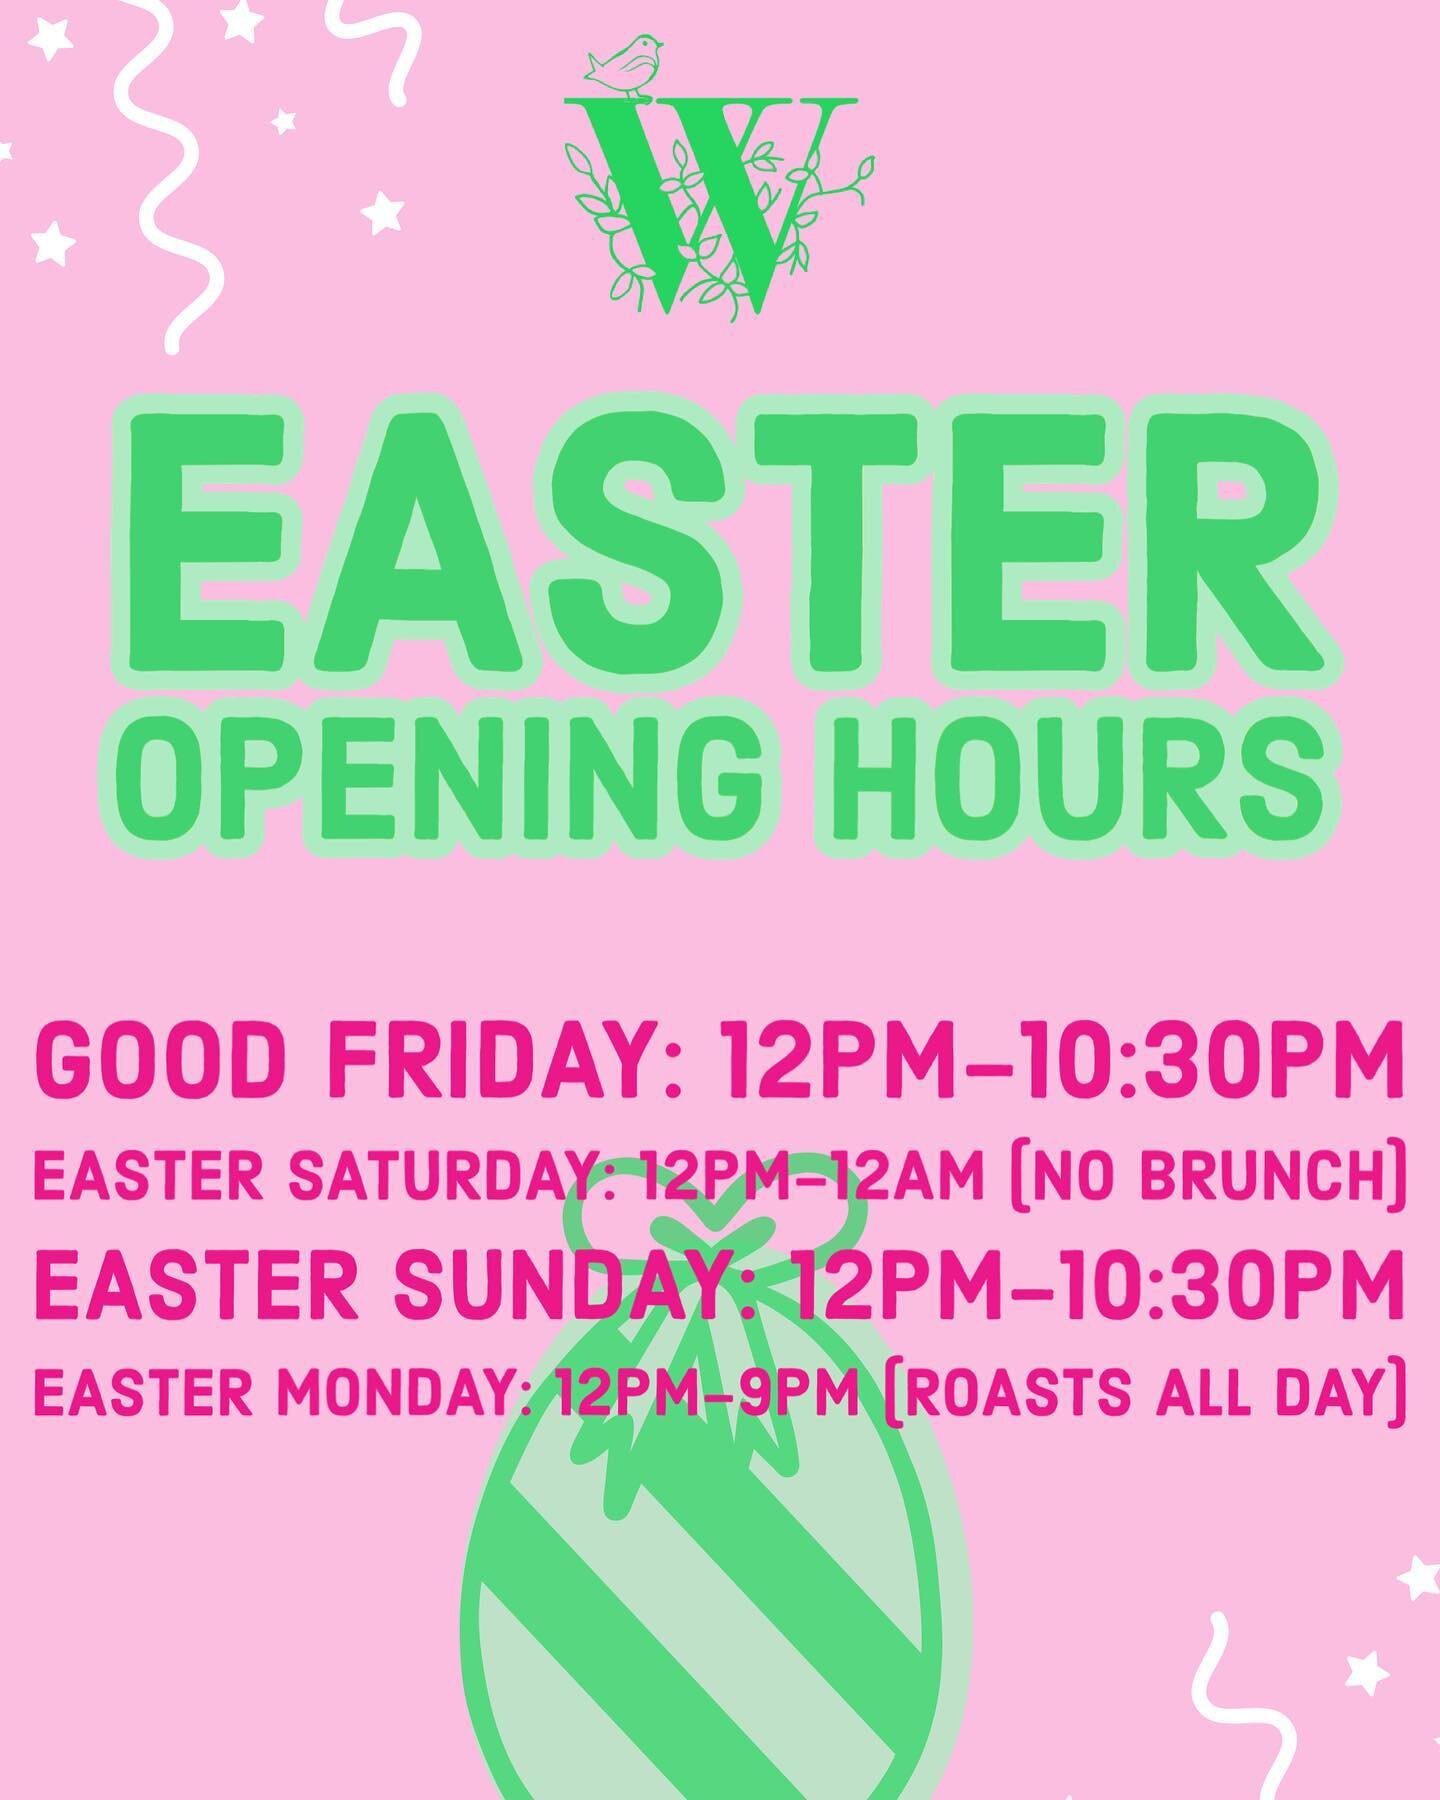 The Easter weekend is coming up, please see our opening hours over the weekend ✨There&rsquo;s no brunch on Saturday but roasts all day on Monday! 🤩